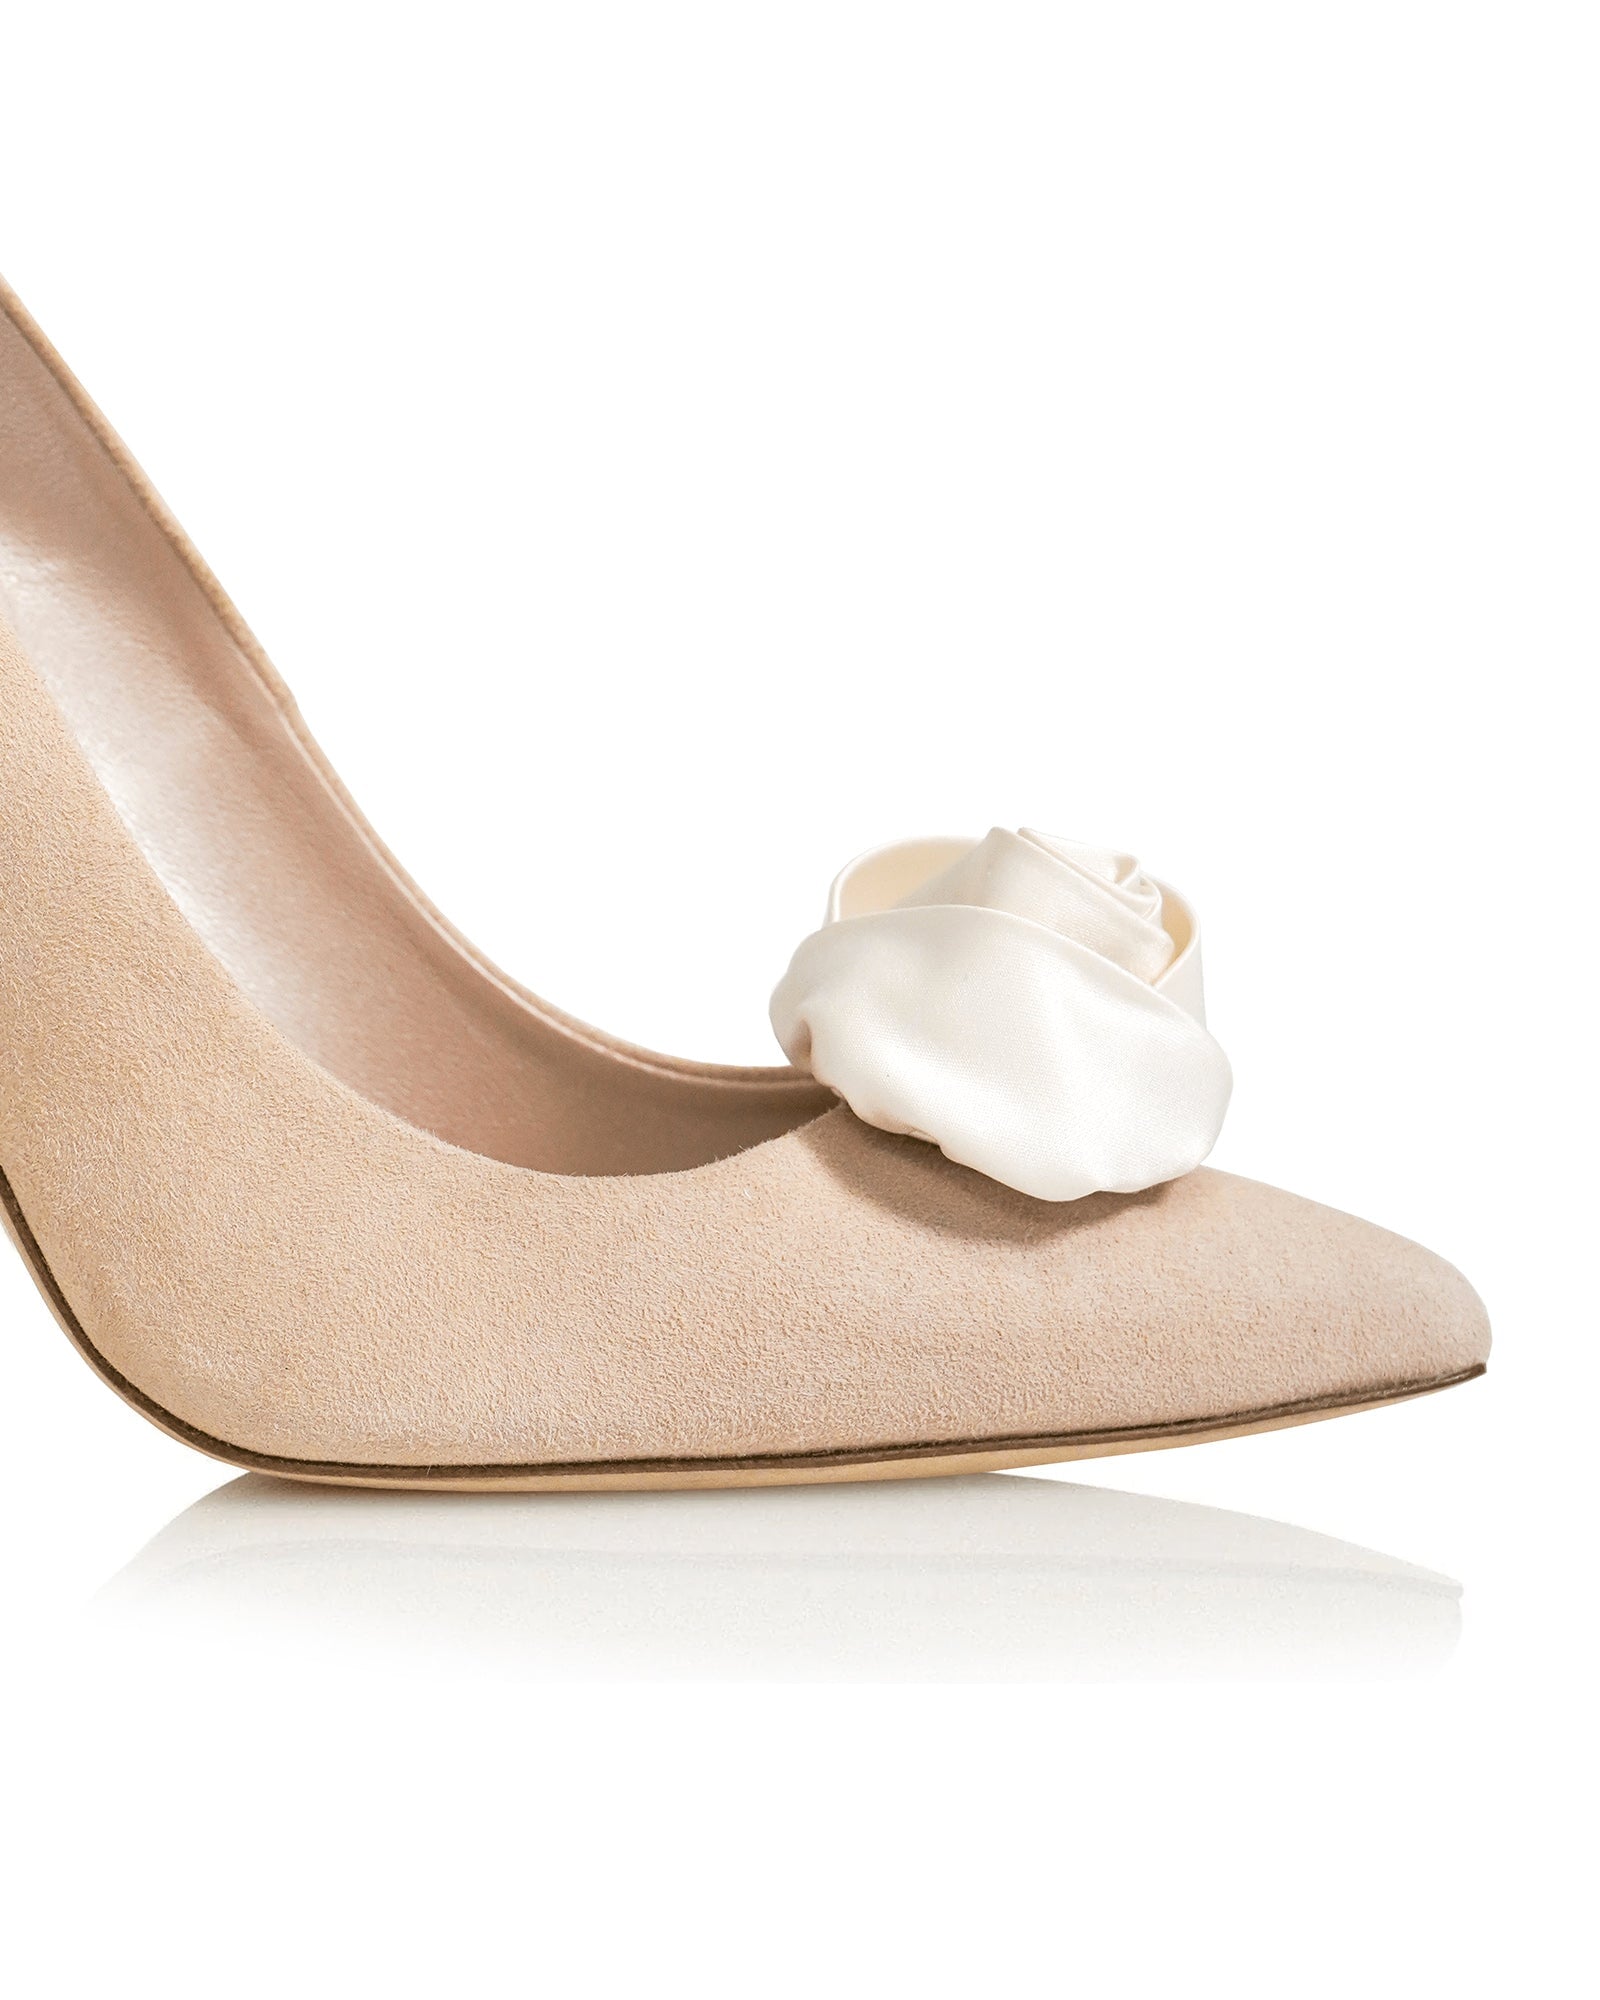 Ivory Ruched Rose Shoe Clips Shoe Clip Duchess Satin Rose Shoe Clips  image